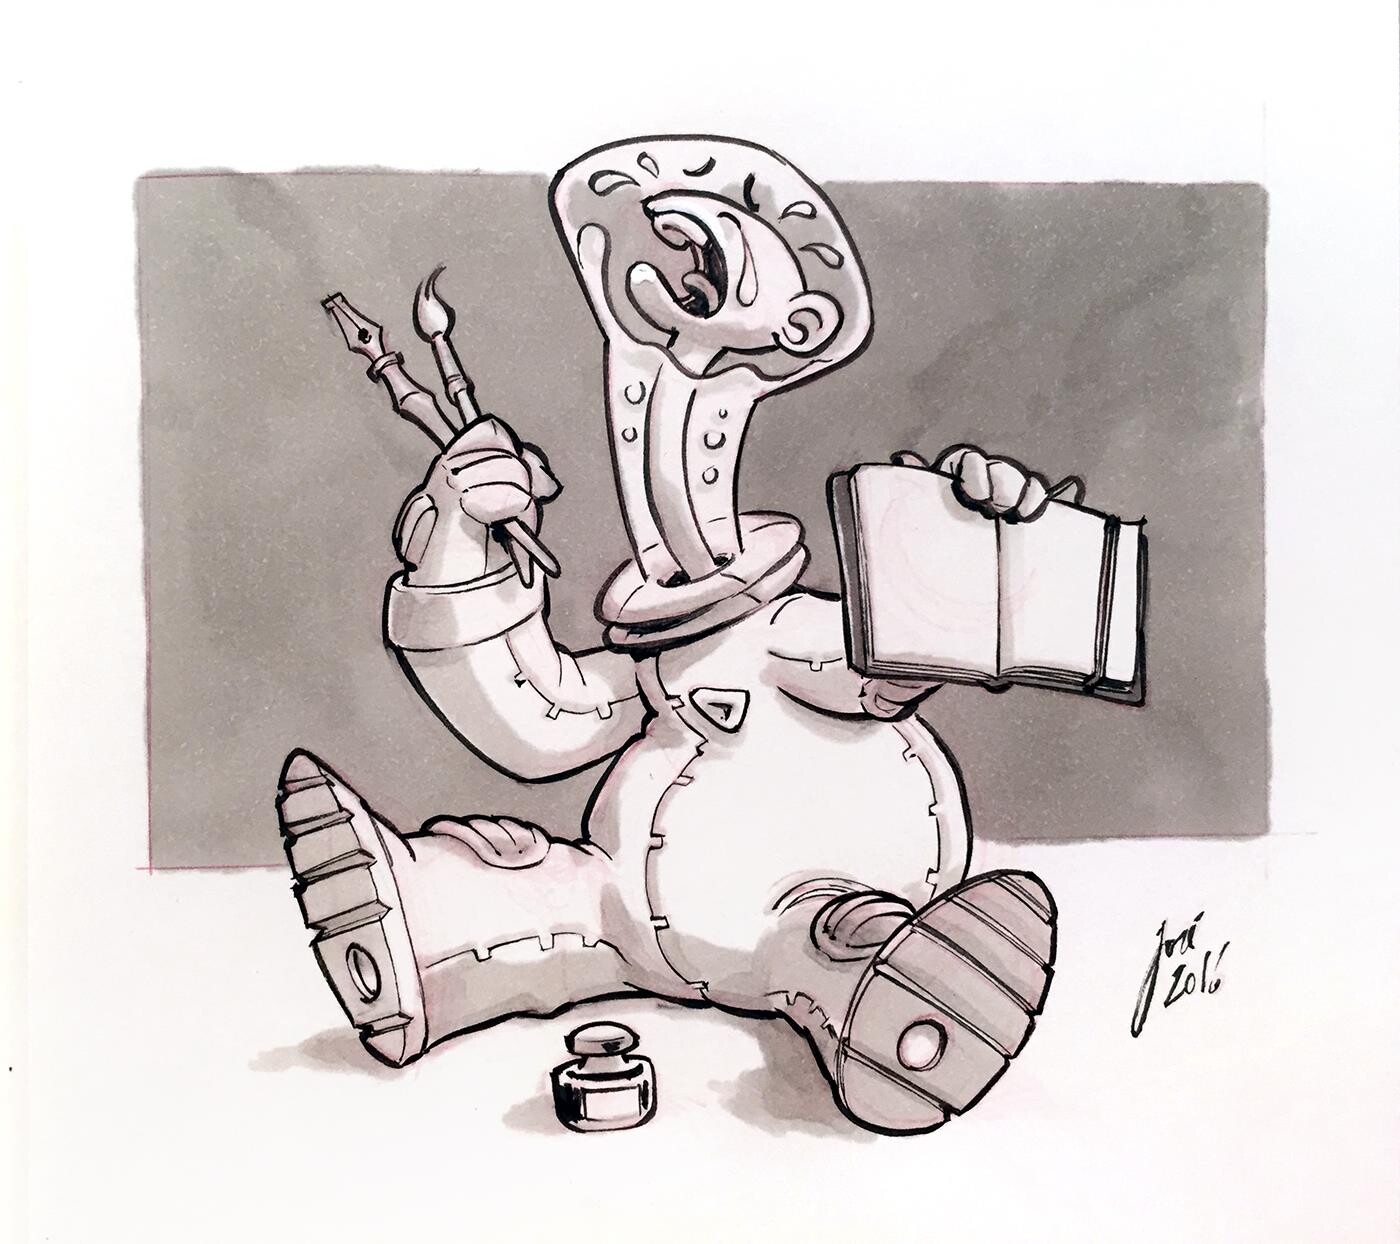 The 10th was a sad day for AstroNut as he failed to make his inktober drawing.